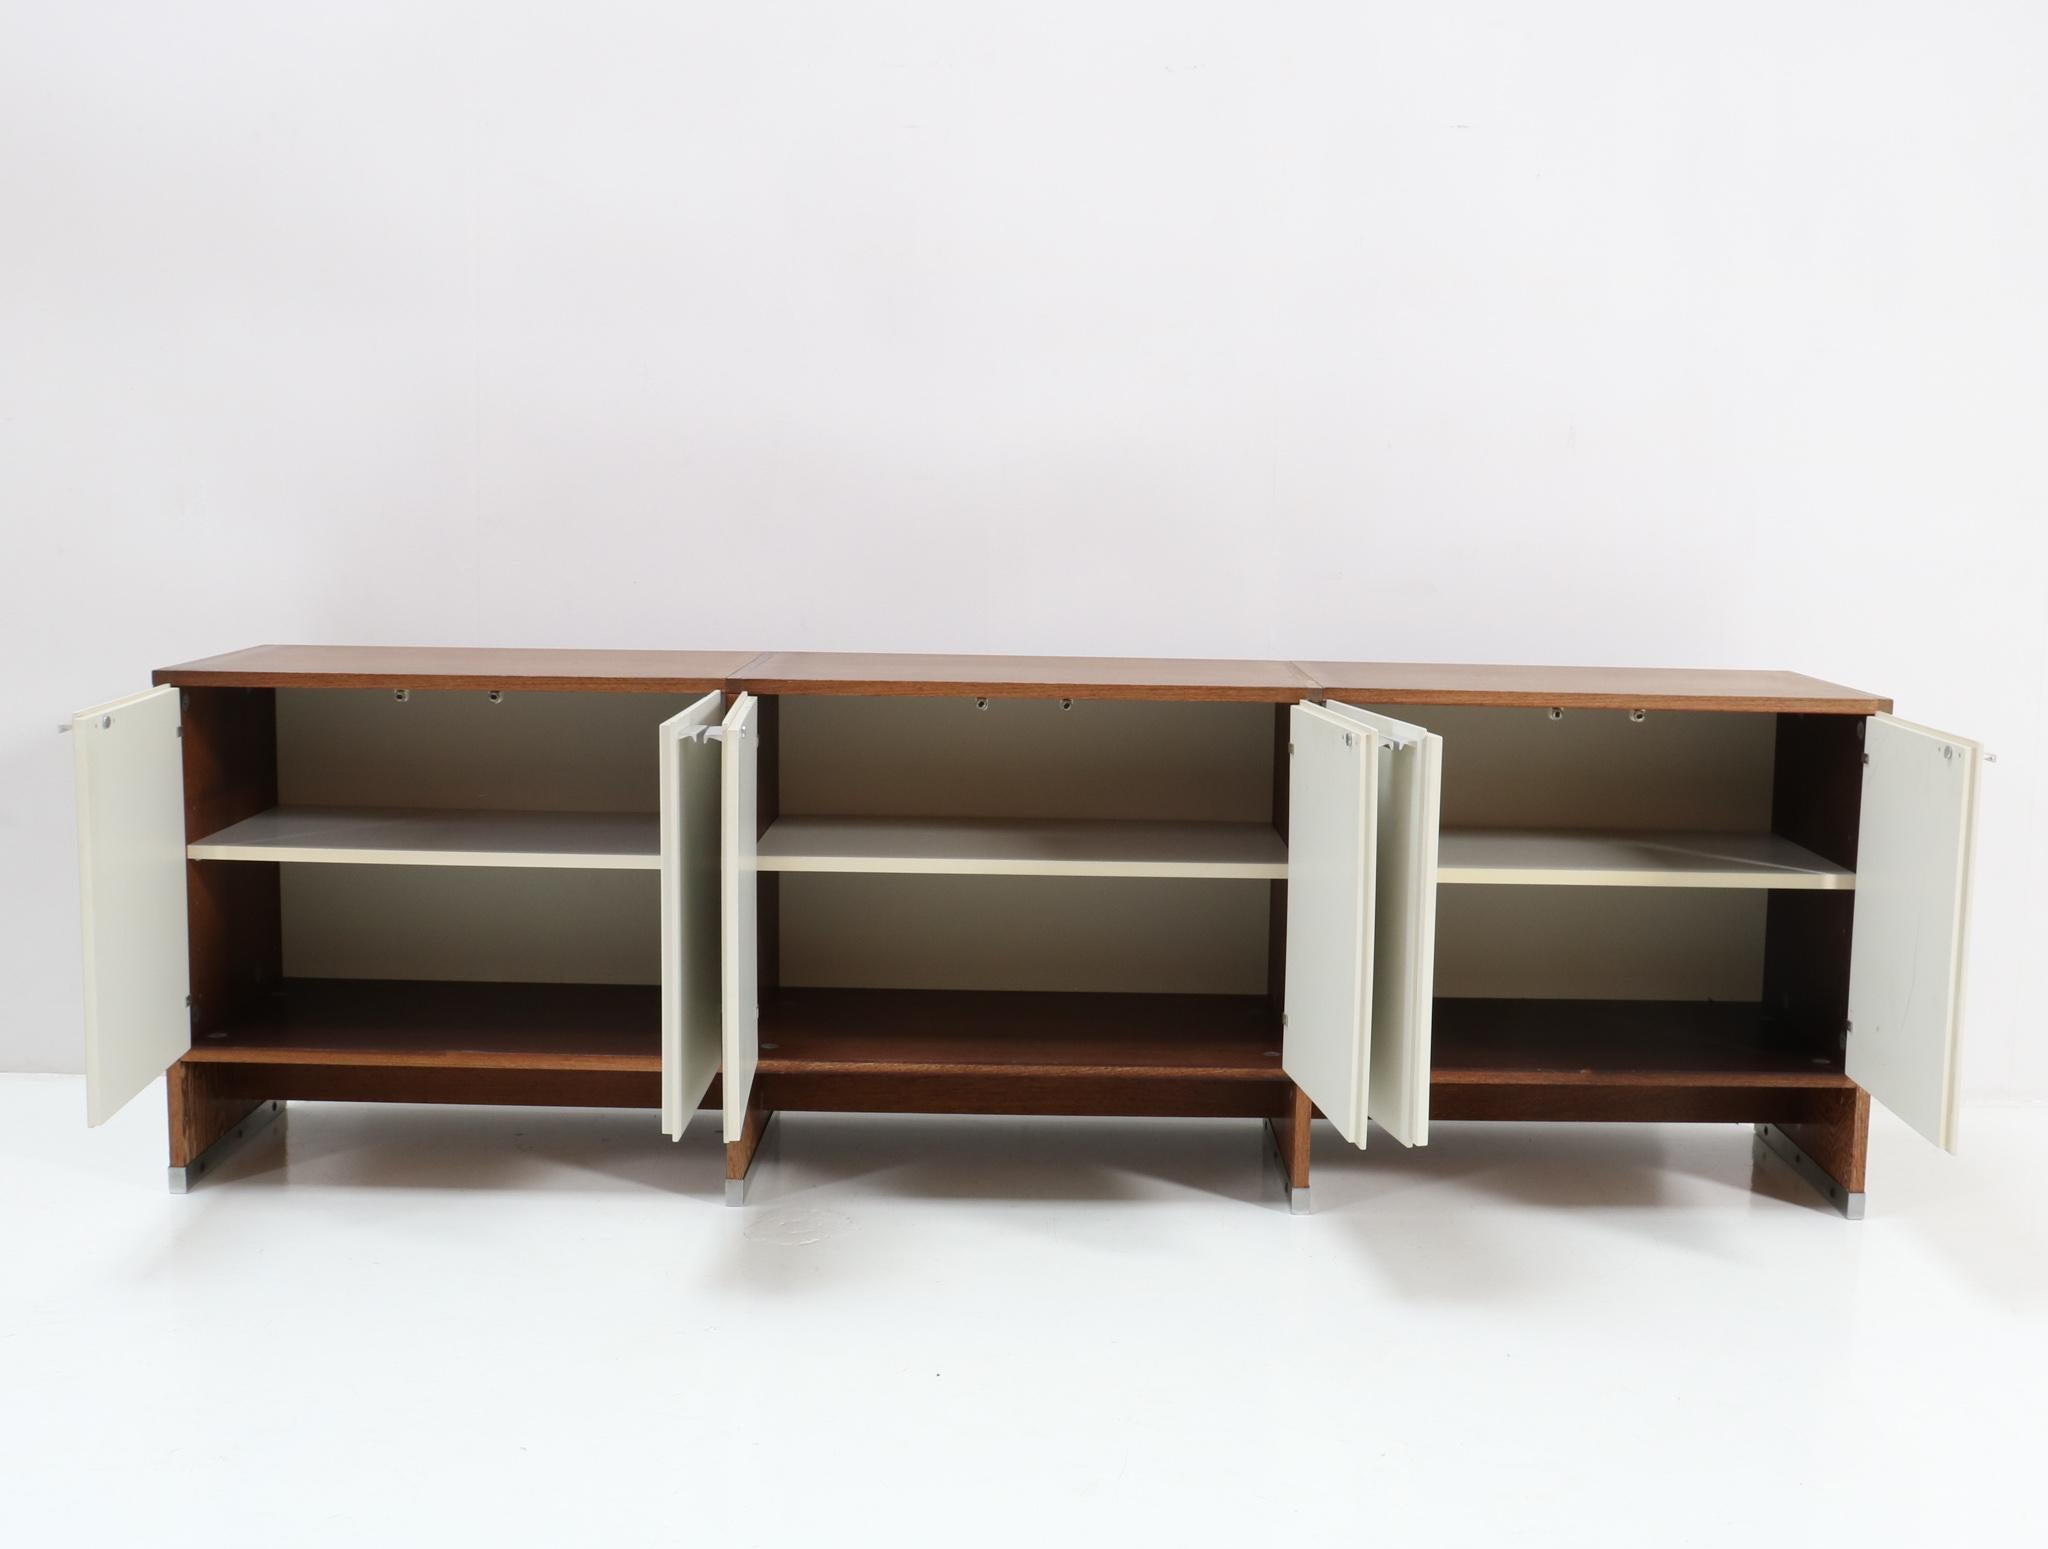 Metal Wengé Mid-Century Modern Credenza or Sideboard by Cees Braakman for Pastoe, 1964